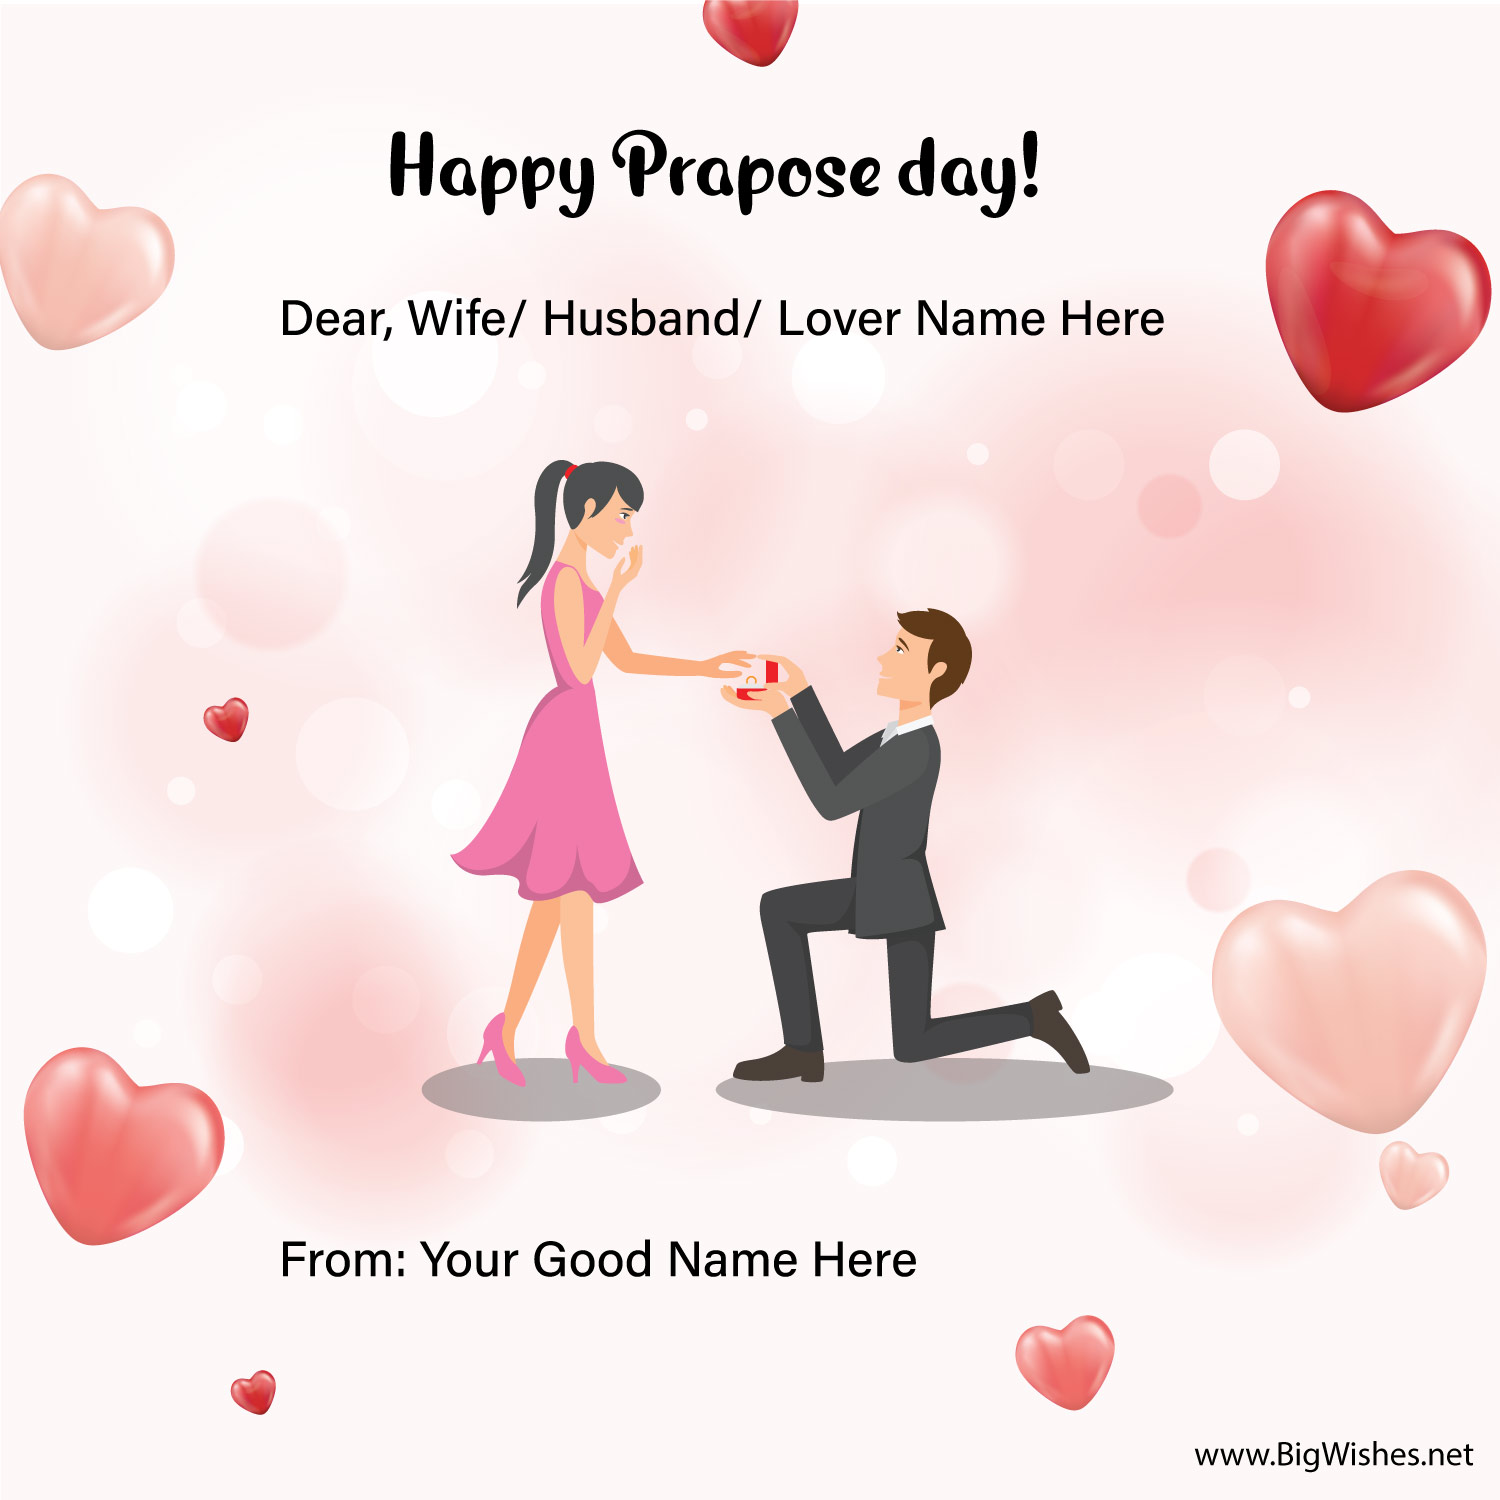 Propose Day Images for Girlfriend or Wife